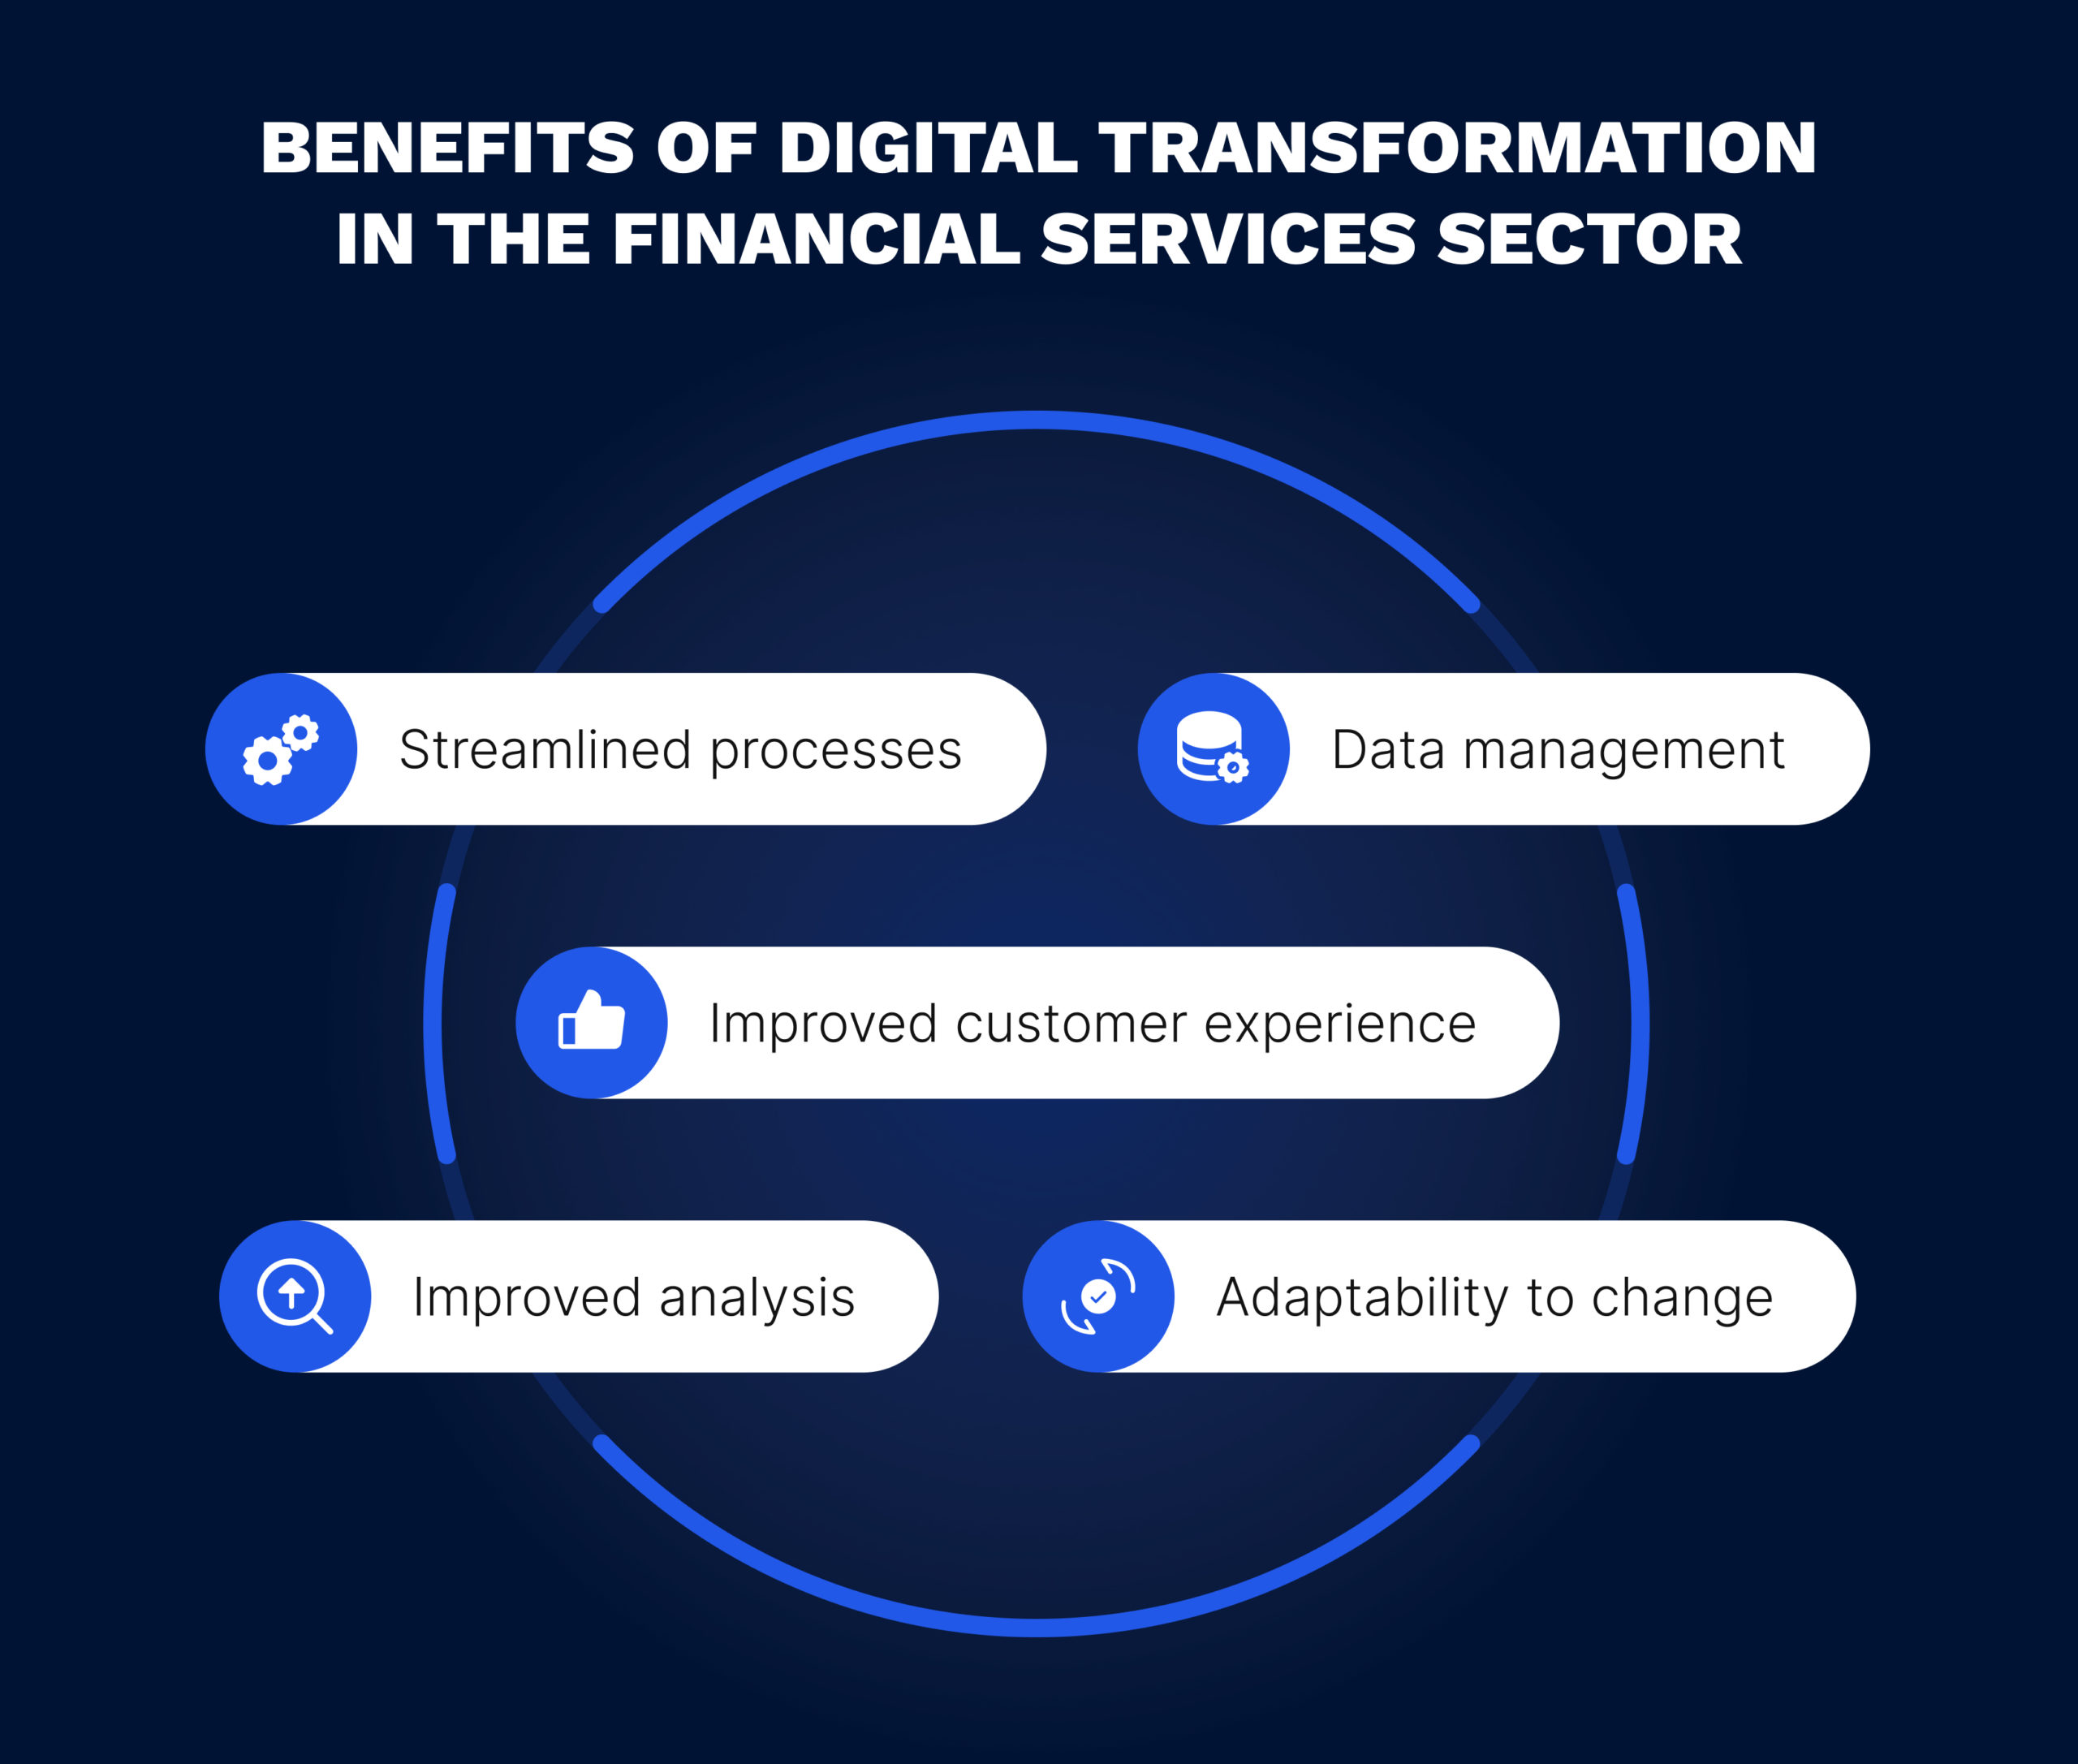 Advantages of digital transformation in financial services